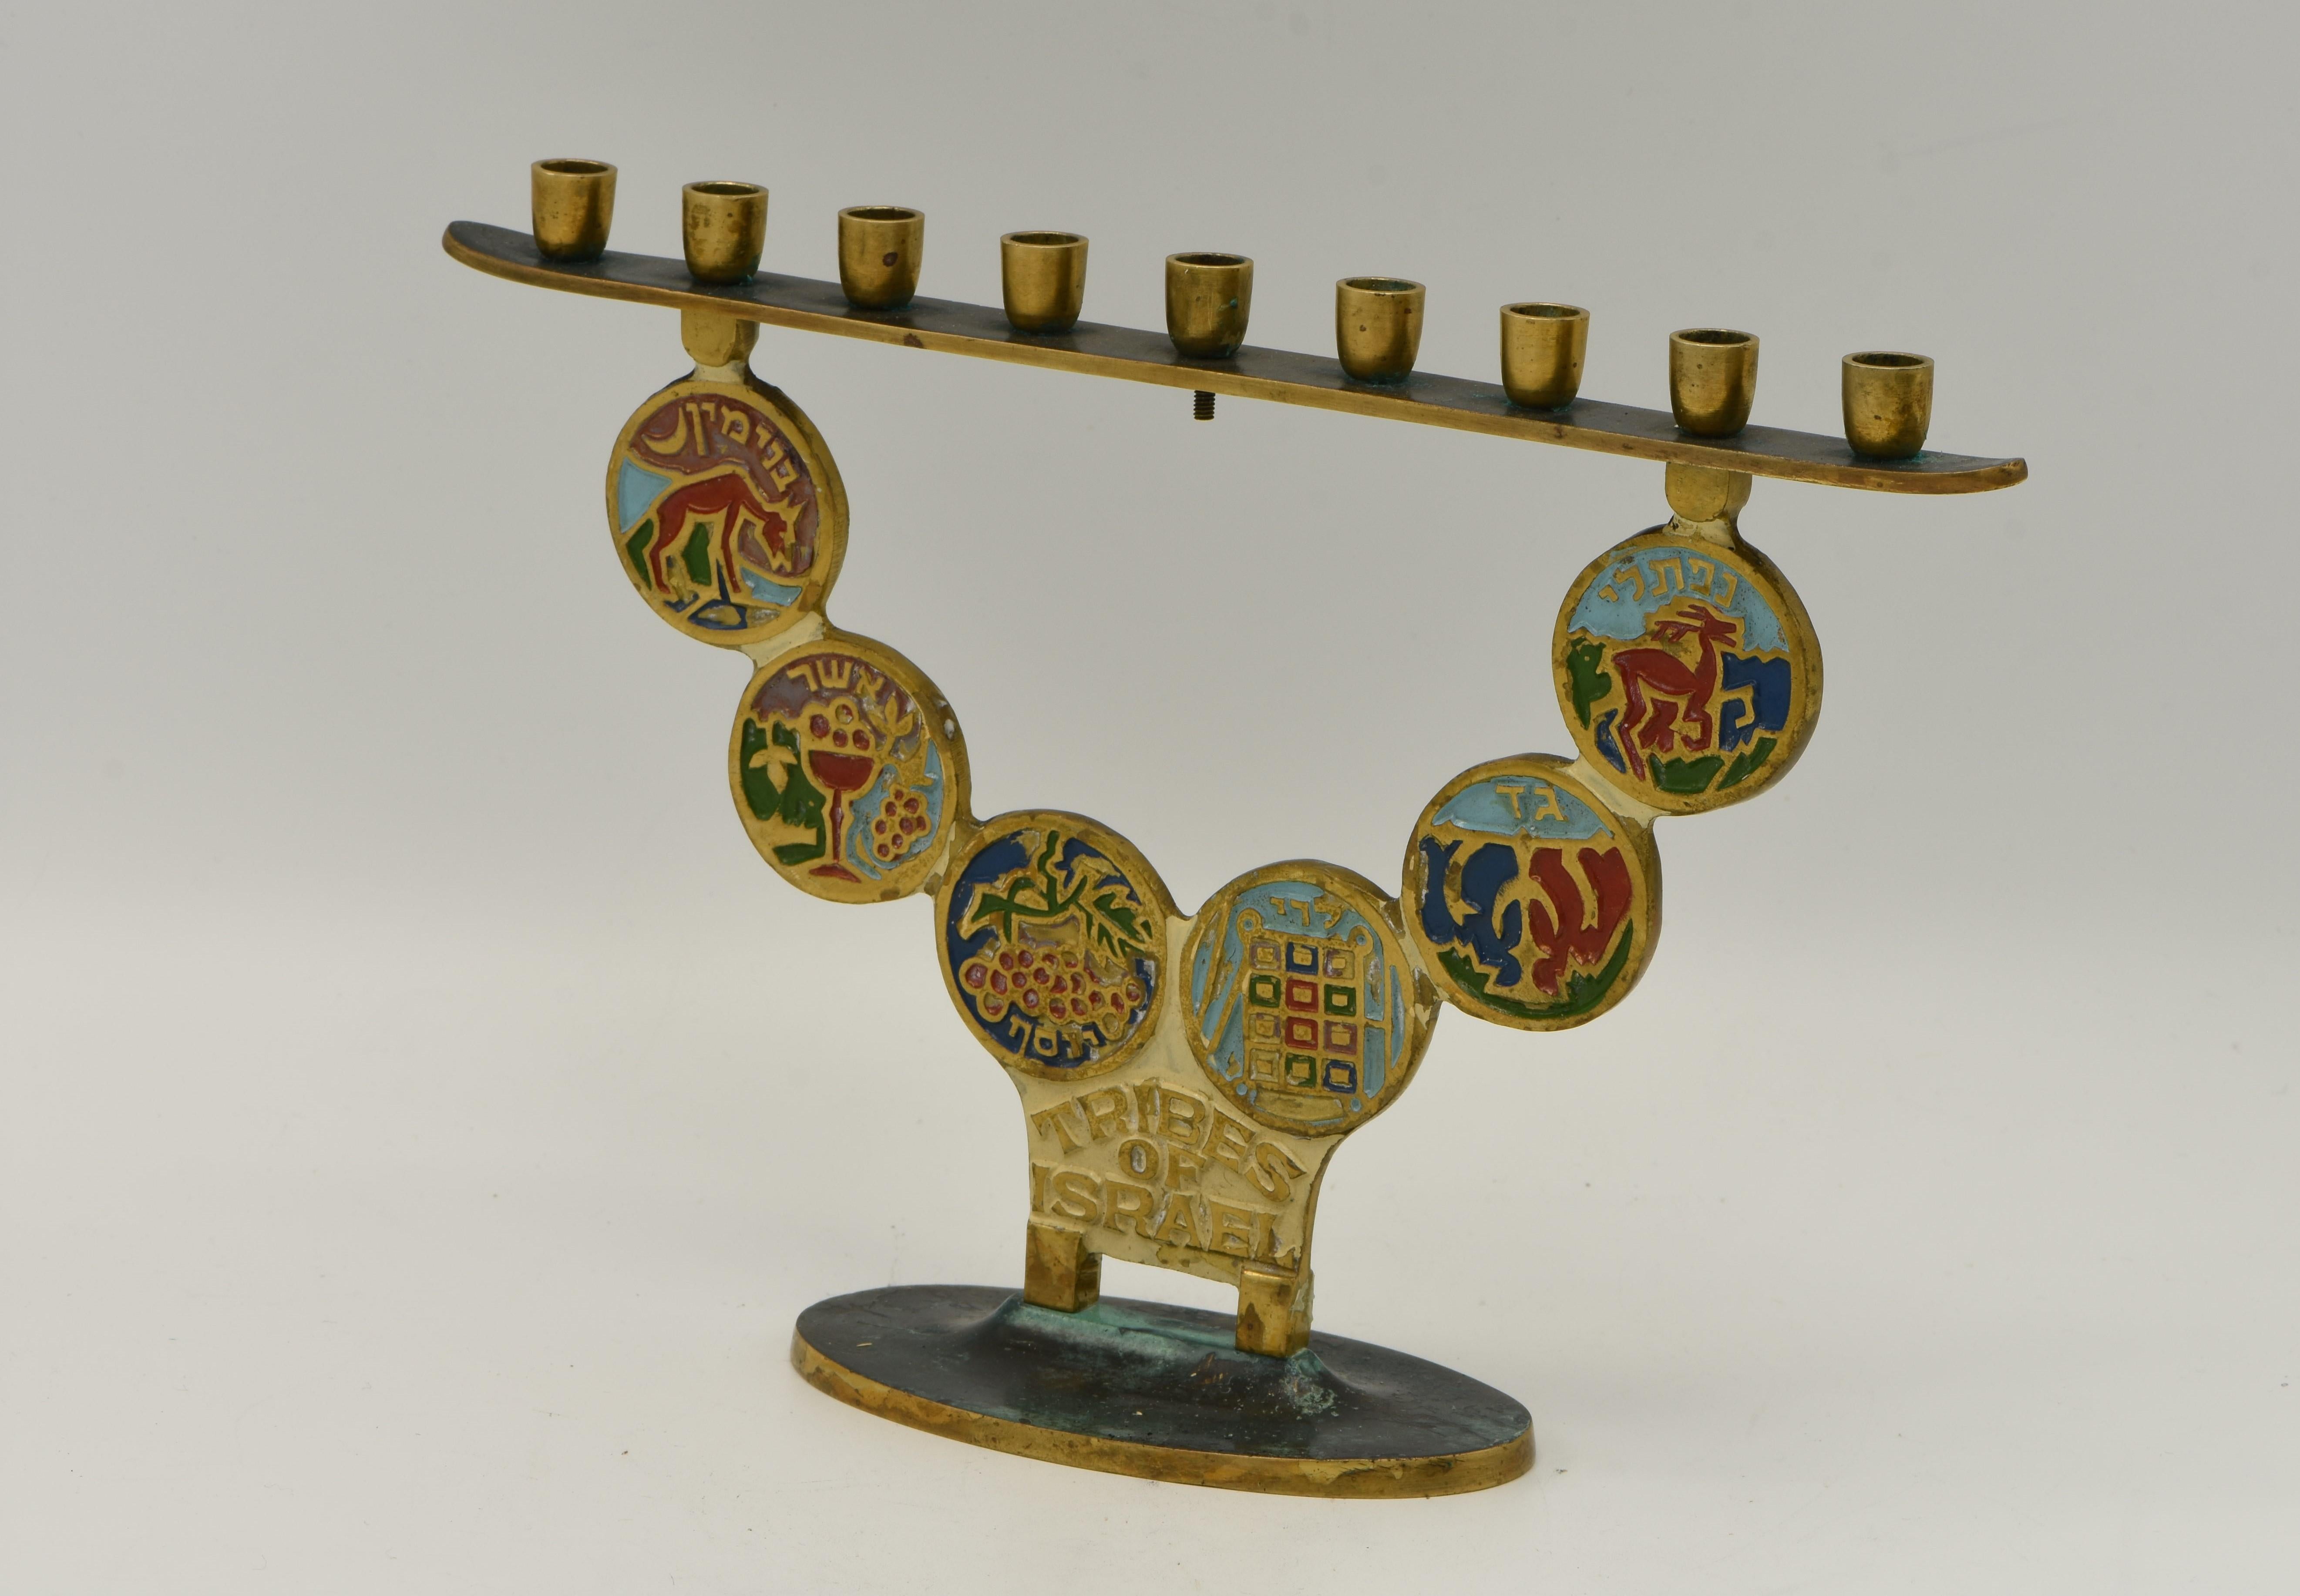 Hanukkah Lamp Menorah, brass, Israel, circa 1950.
On an oval base with six medallions depict the Tribes of Israel symbols decorated with colored enamel.
Titled in English and Hebrew 